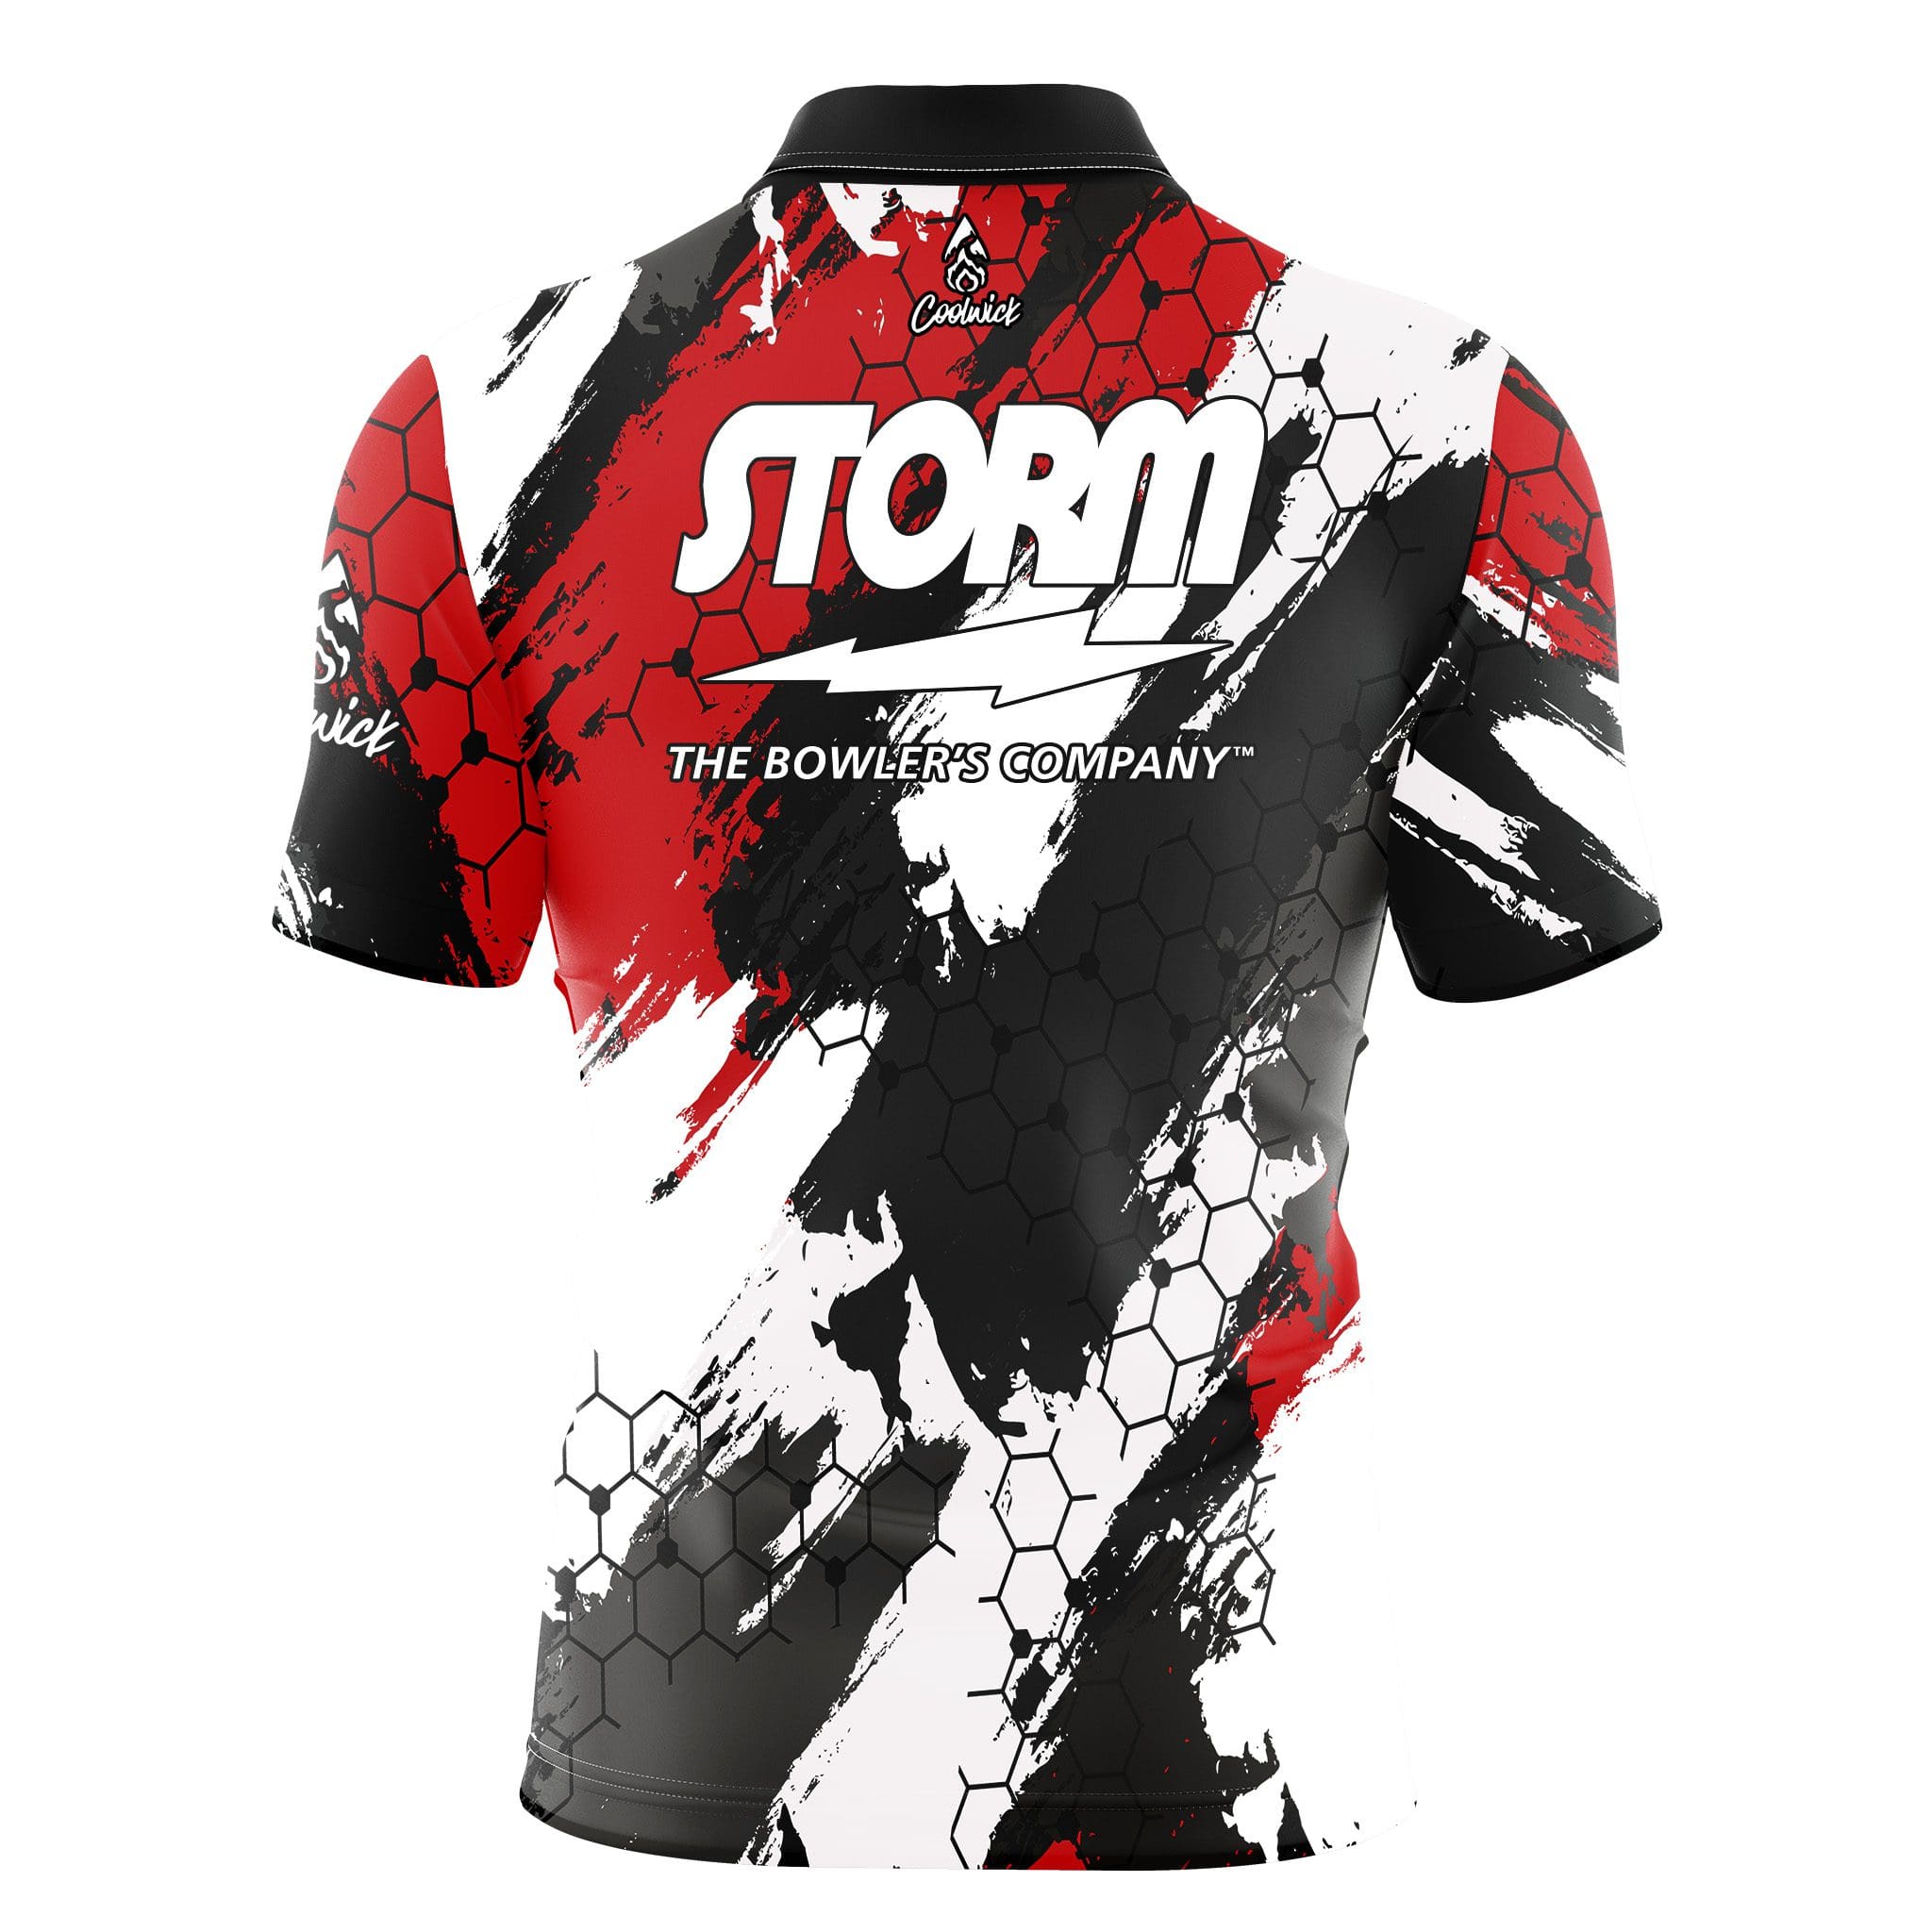 Storm Black and Gold Liquid Marble Quick Ship CoolWick Sash Zip Bowling Jersey | BowlersMart